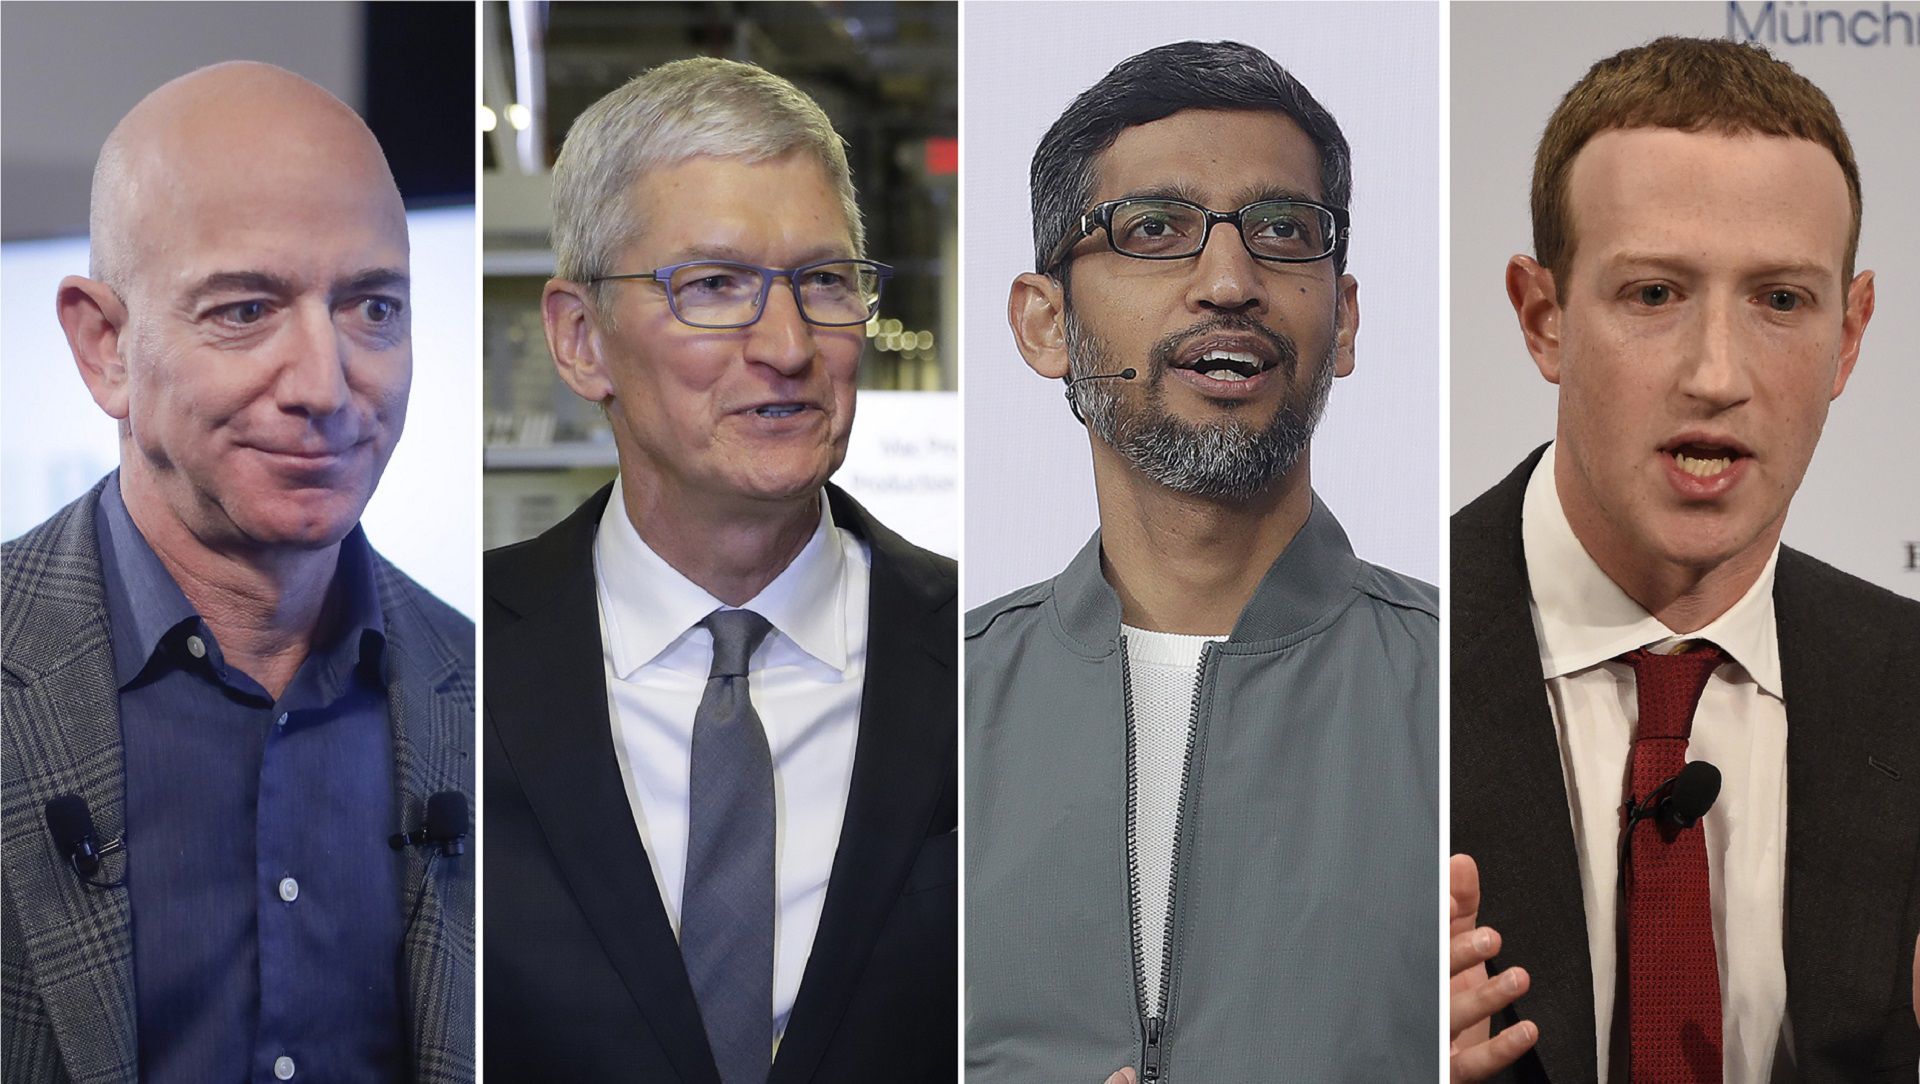 This combination of 2019-2020 photos shows Amazon CEO Jeff Bezos, Apple CEO Tim Cook, Google CEO Sundar Pichai and Facebook CEO Mark Zuckerberg. On Wednesday, July 29, 2020, the four Big Tech leaders will answer for their companies’ practices before Congress at a hearing by the House Judiciary subcommittee on antitrust.  (AP Photo/Pablo Martinez Monsivais, Evan Vucci, Jeff Chiu, Jens Meyer)